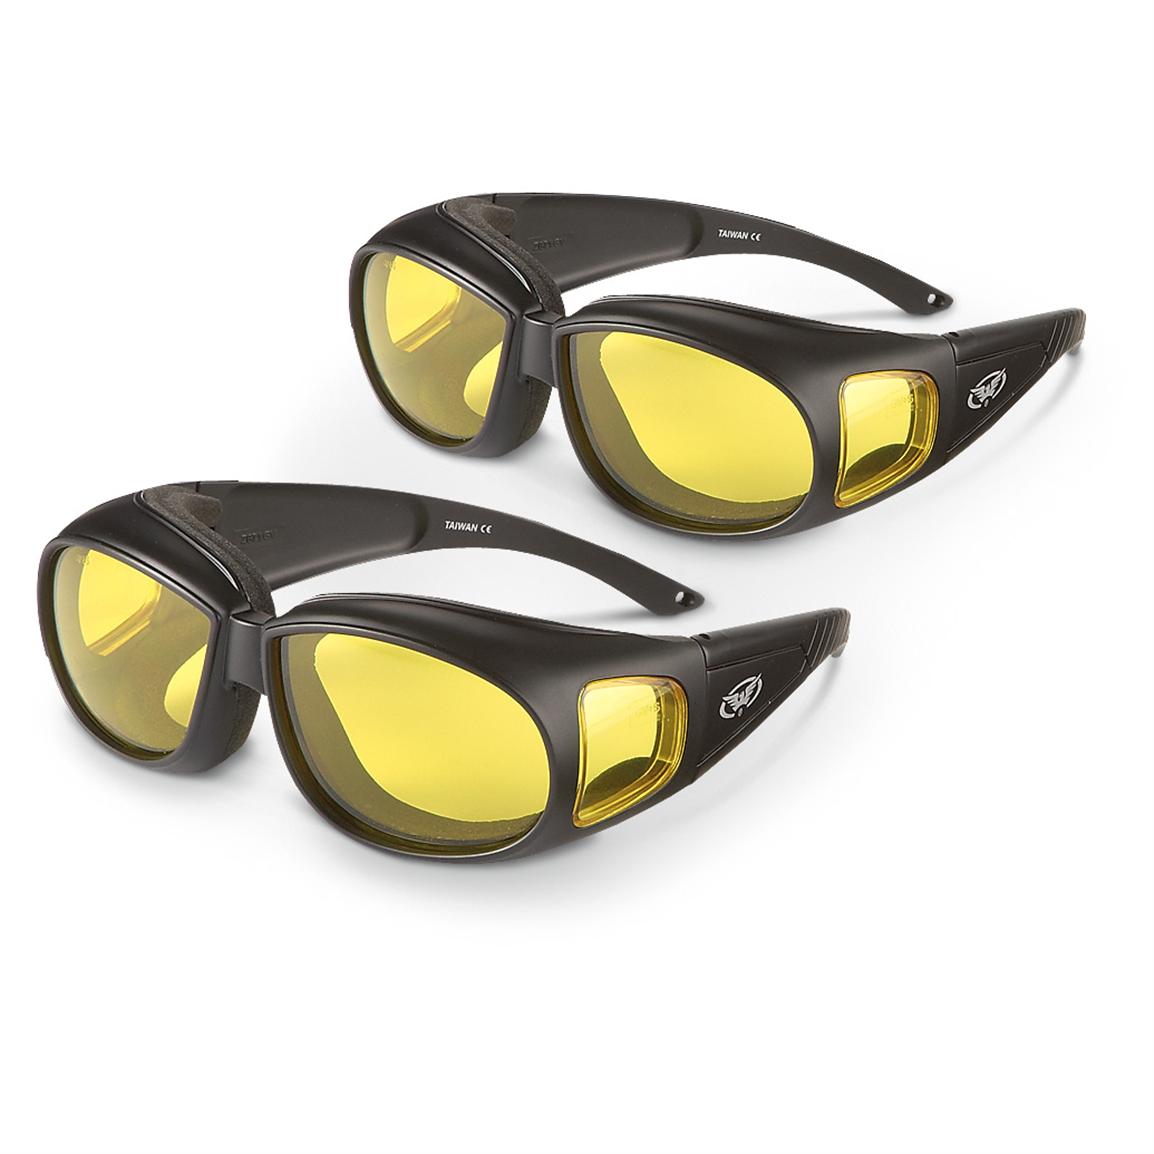 2-Prs. of Outfitters Overtop Polycarbonate Glasses, Yellow